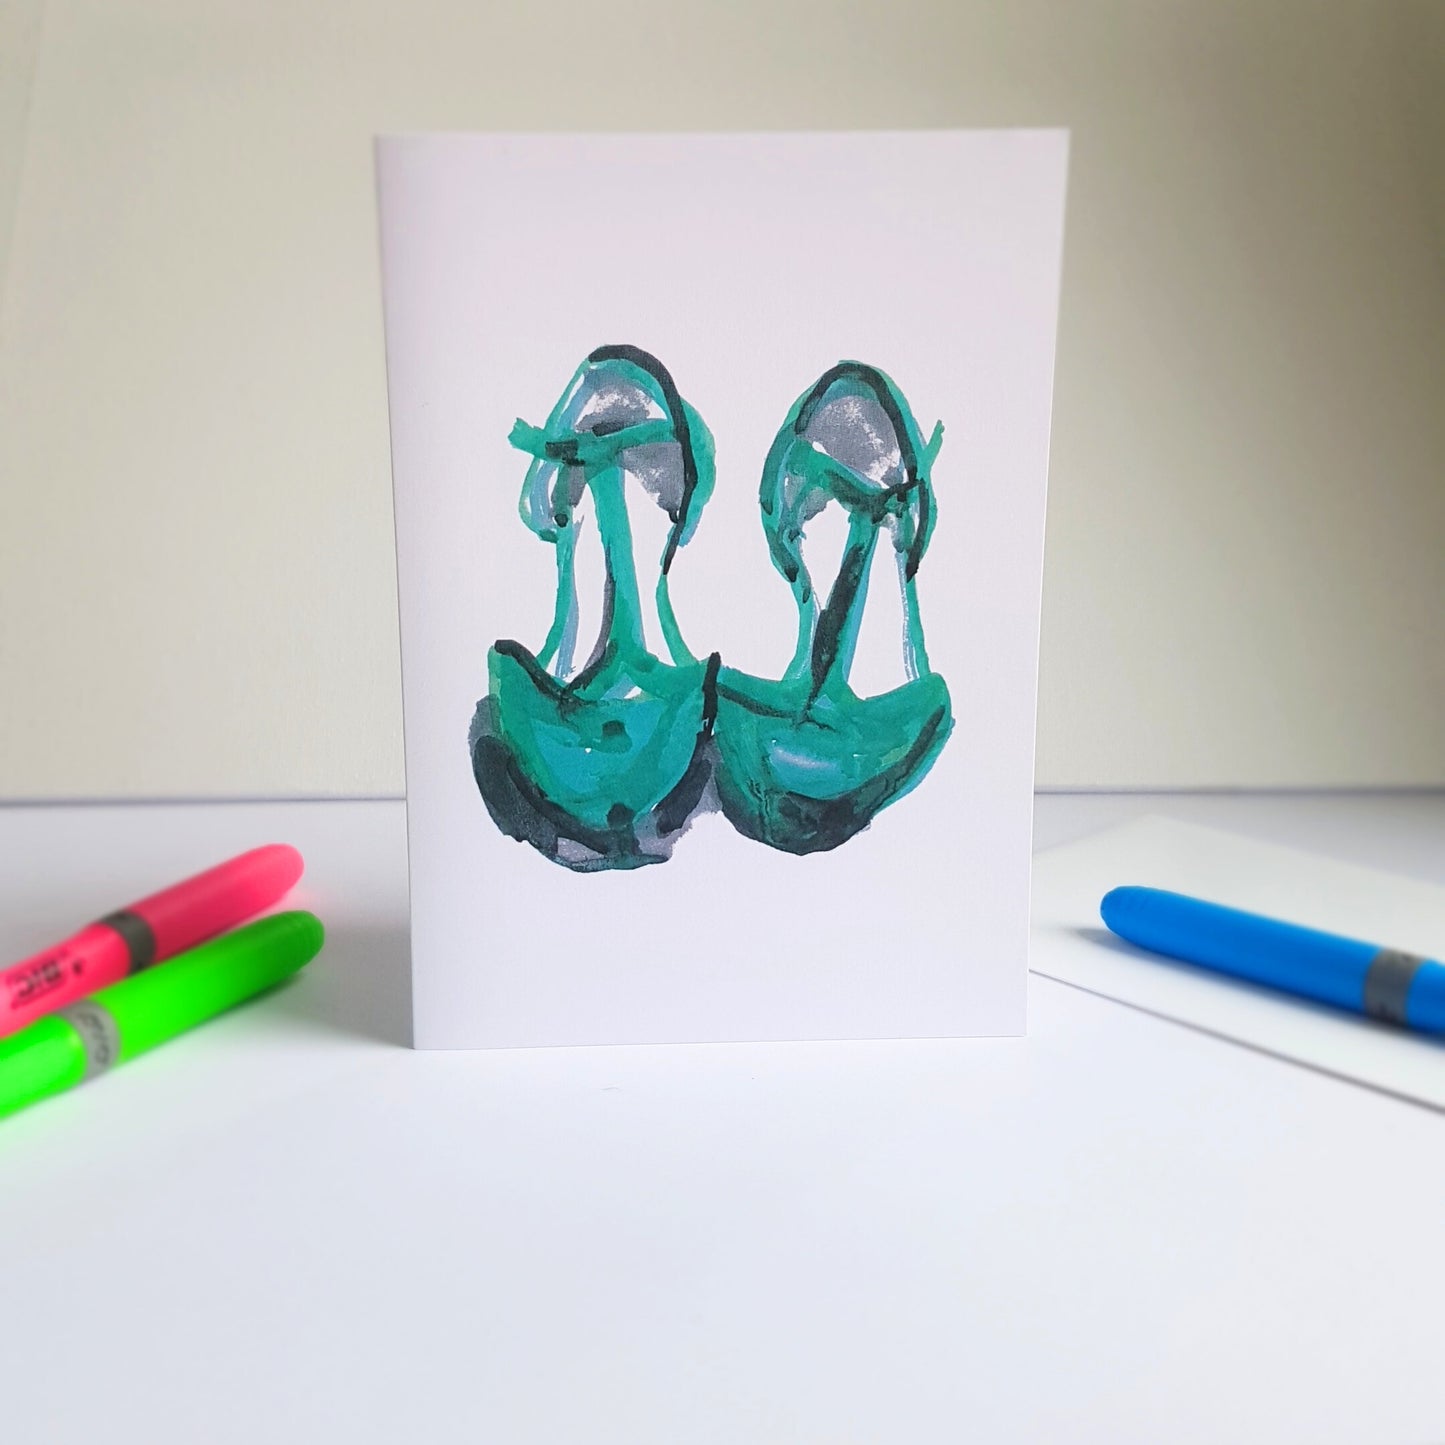 Shoe art greeting card featuring an illustration of green t-bar shoes by UK artist Julia Laing. Beside the card are  neon marker pens and a white envelope.